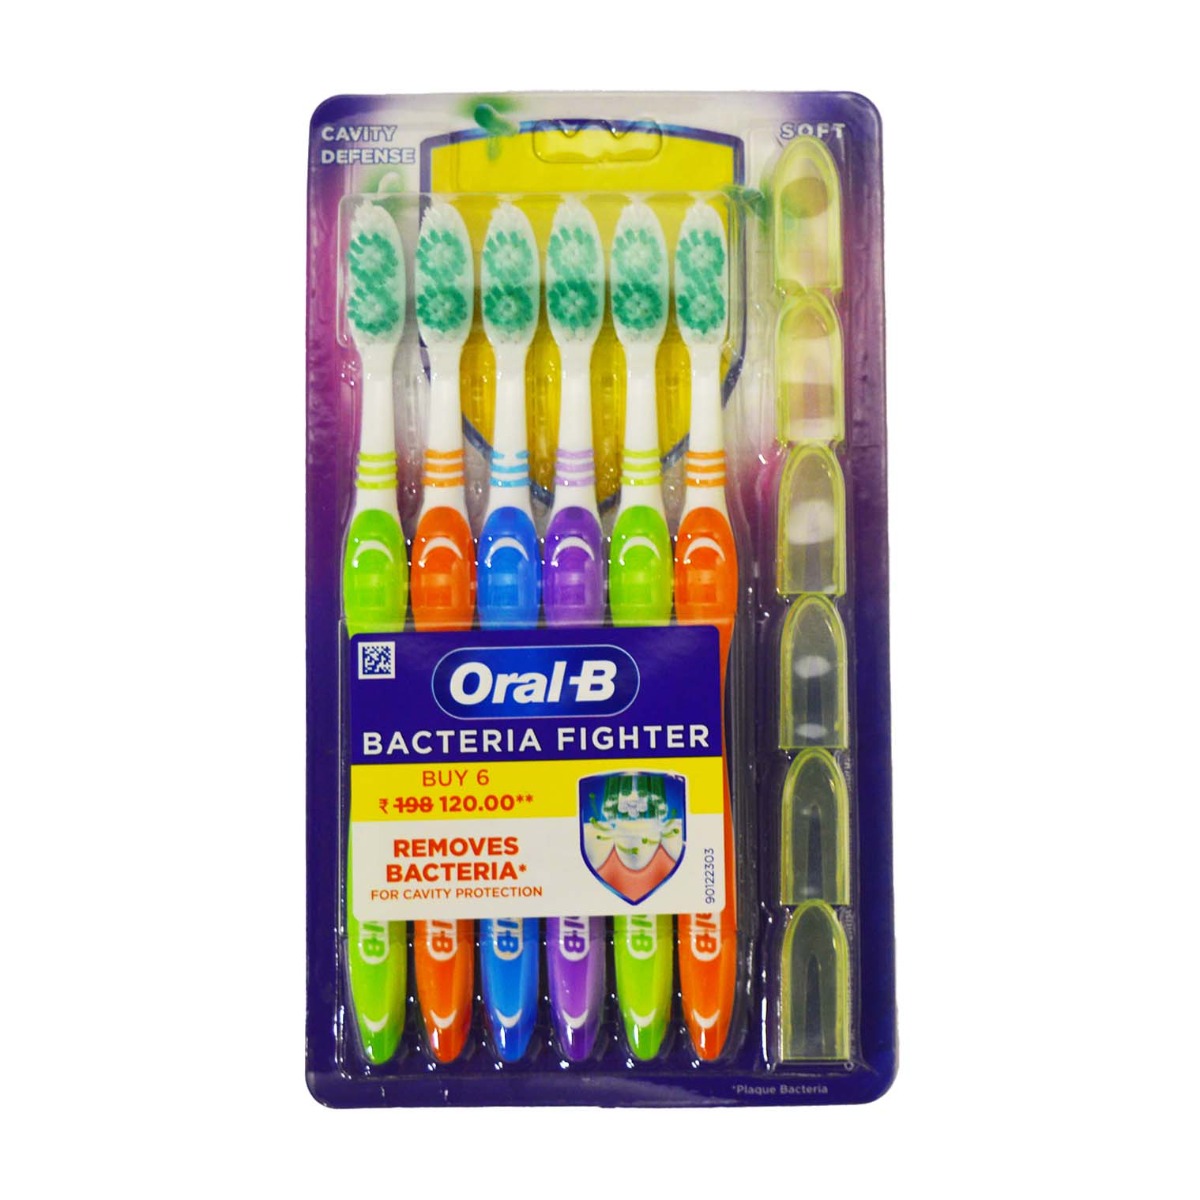 Oral-B Cavity Defense Bacteria Fighter Toothbrush - Soft, Pack of 6